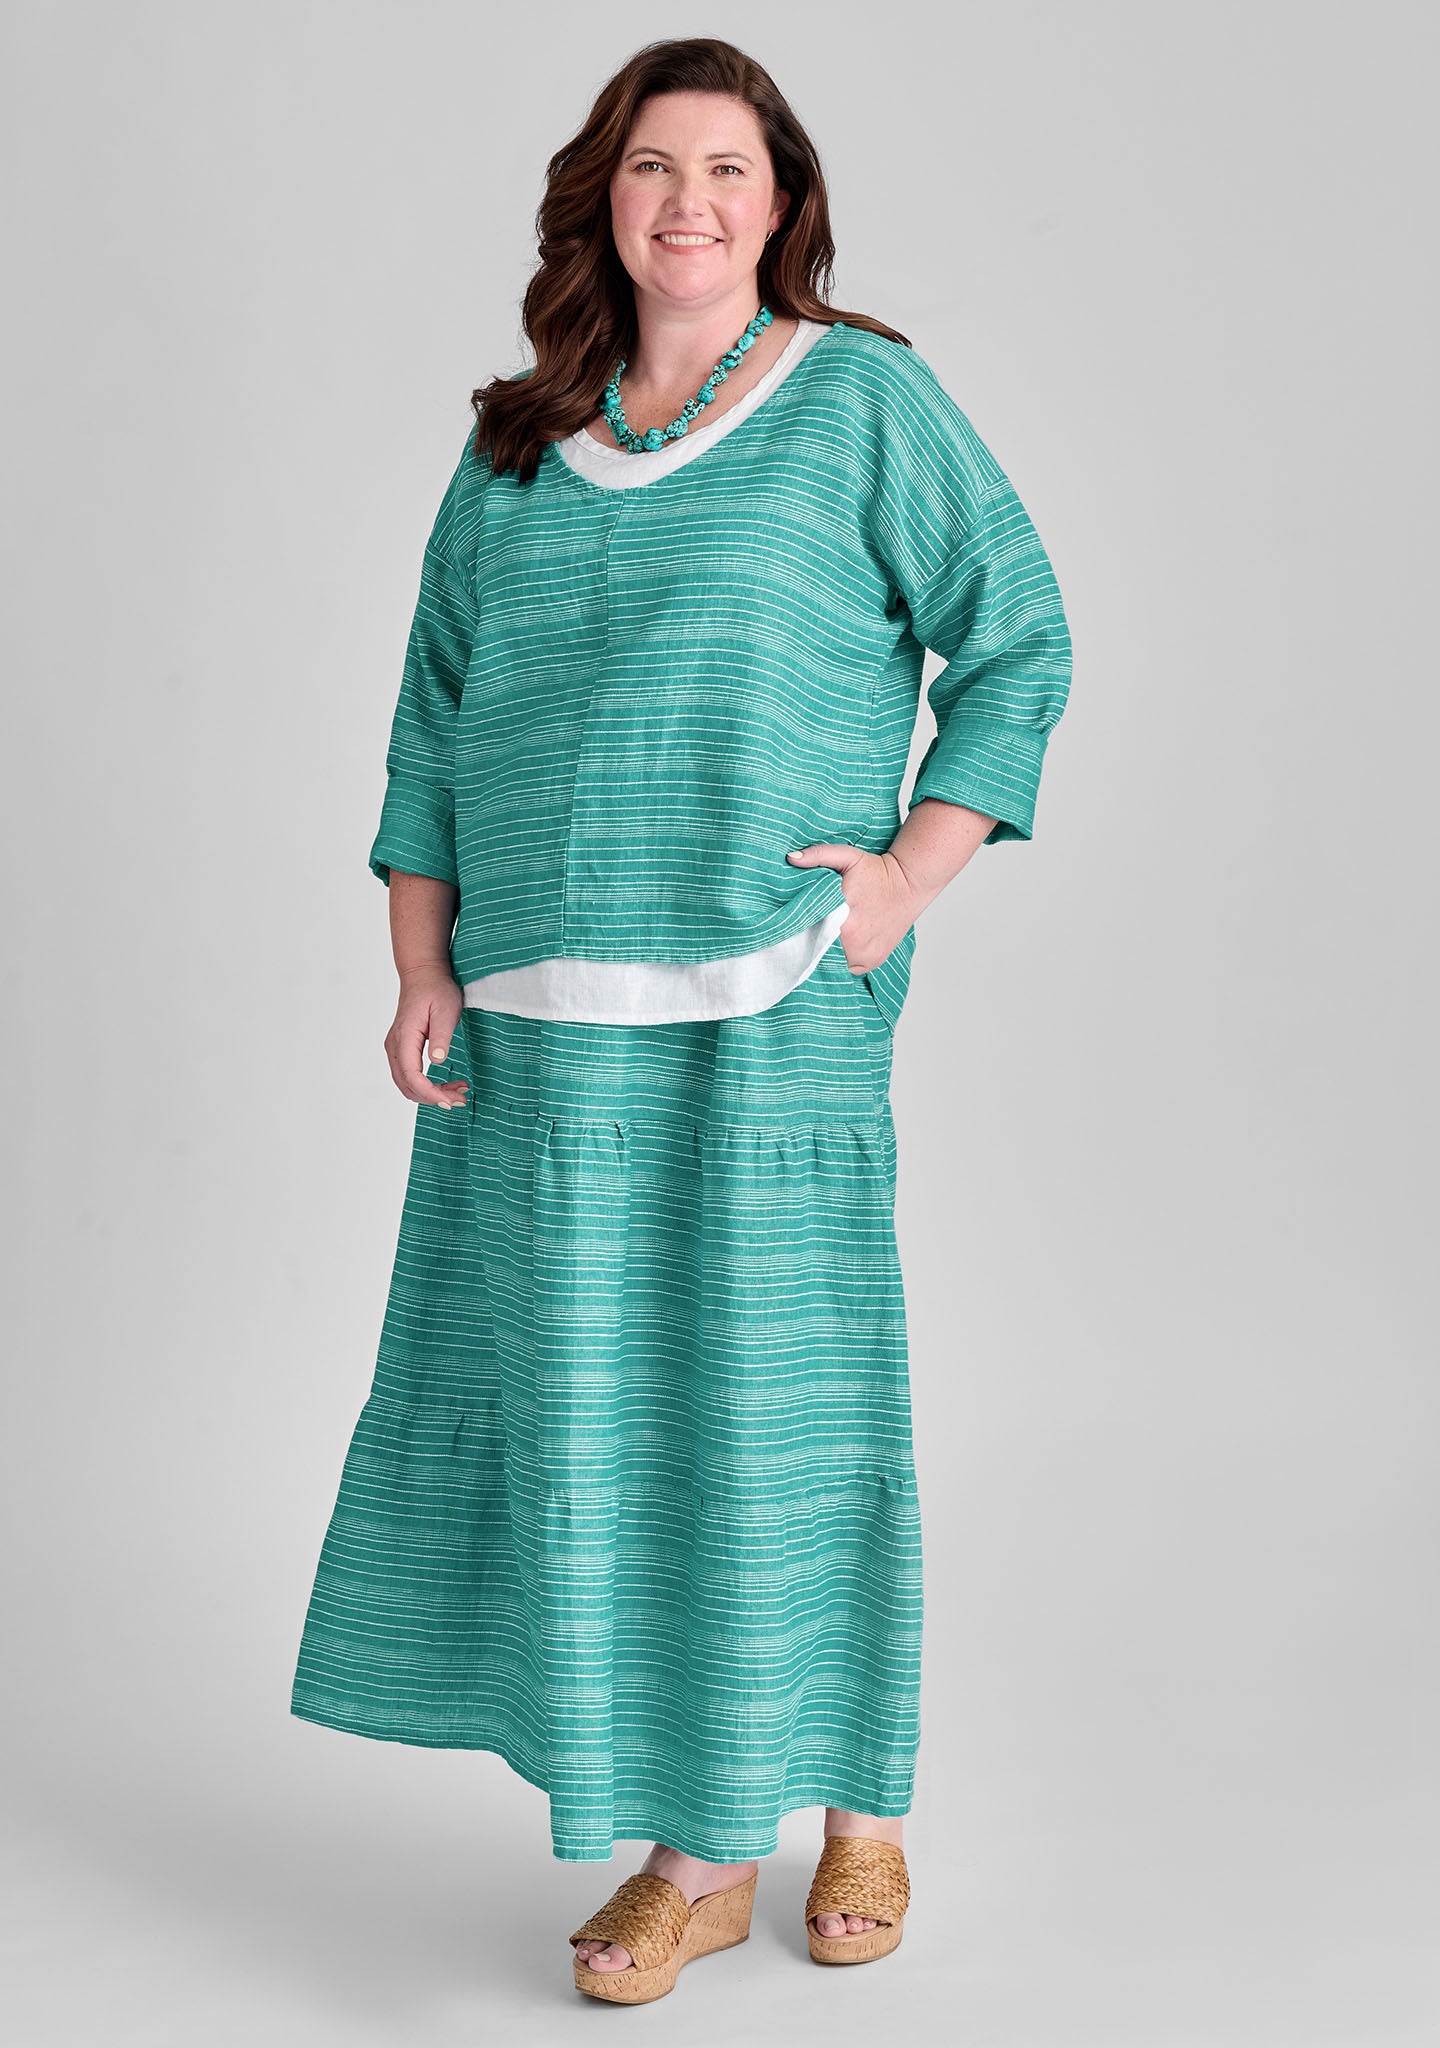 FLAX linen shirt in green with linen tank in white and linen skirt in green